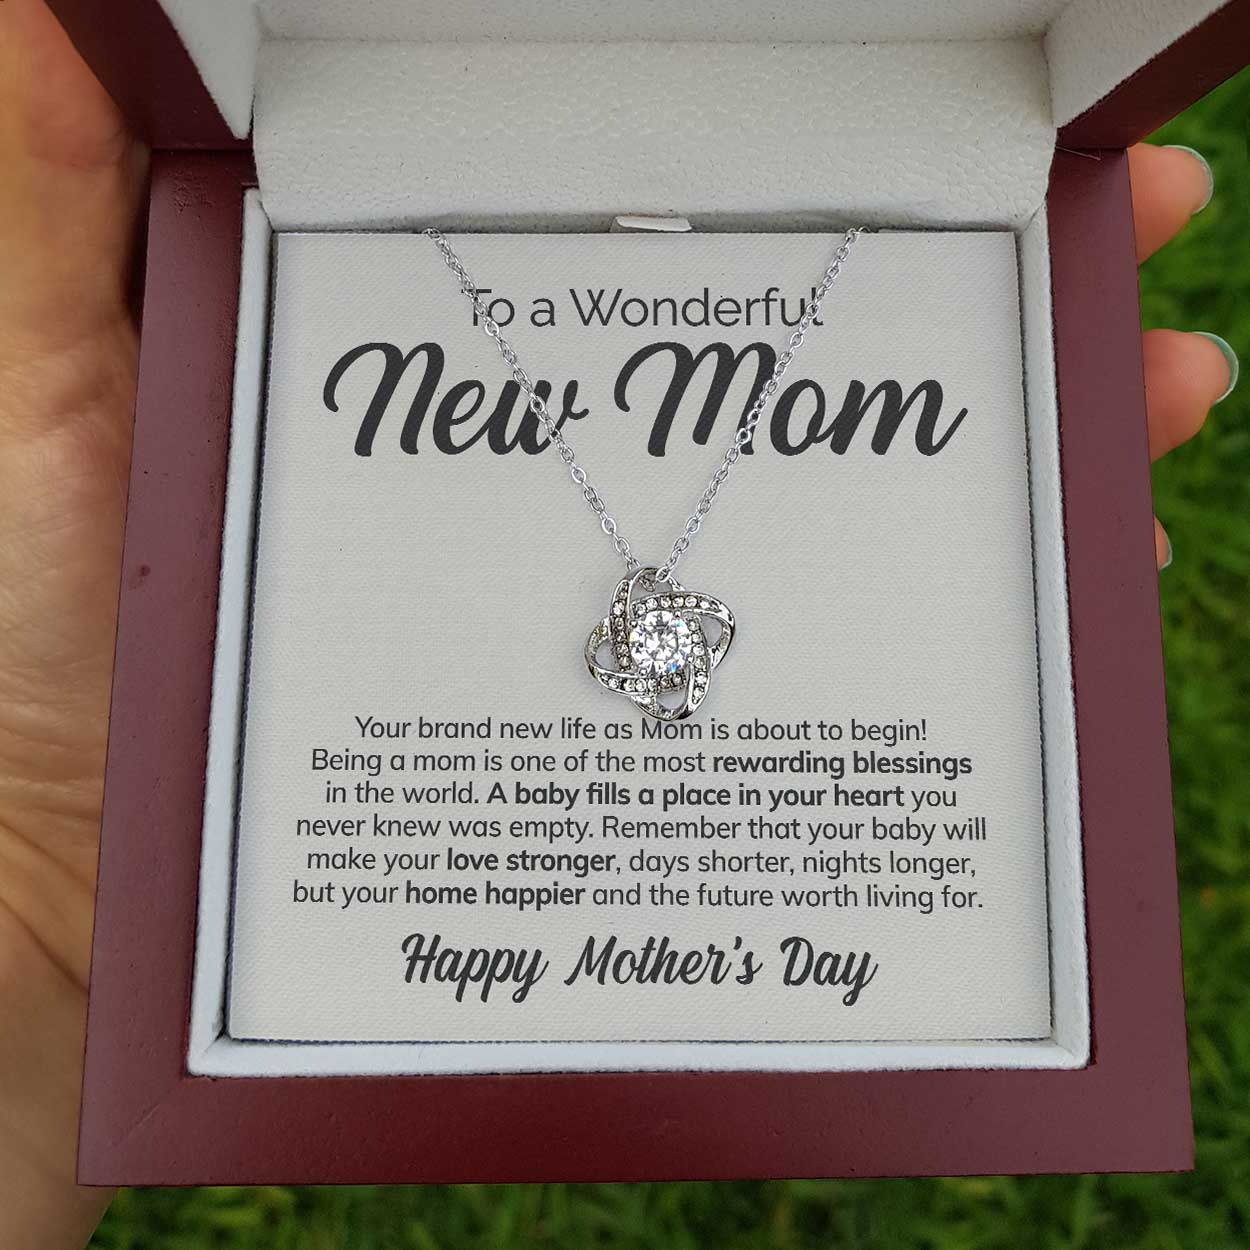 ShineOn Fulfillment Message Cards Standard Box To a Wonderful New Mom - Rewarding Blessings - Love Knot Necklace